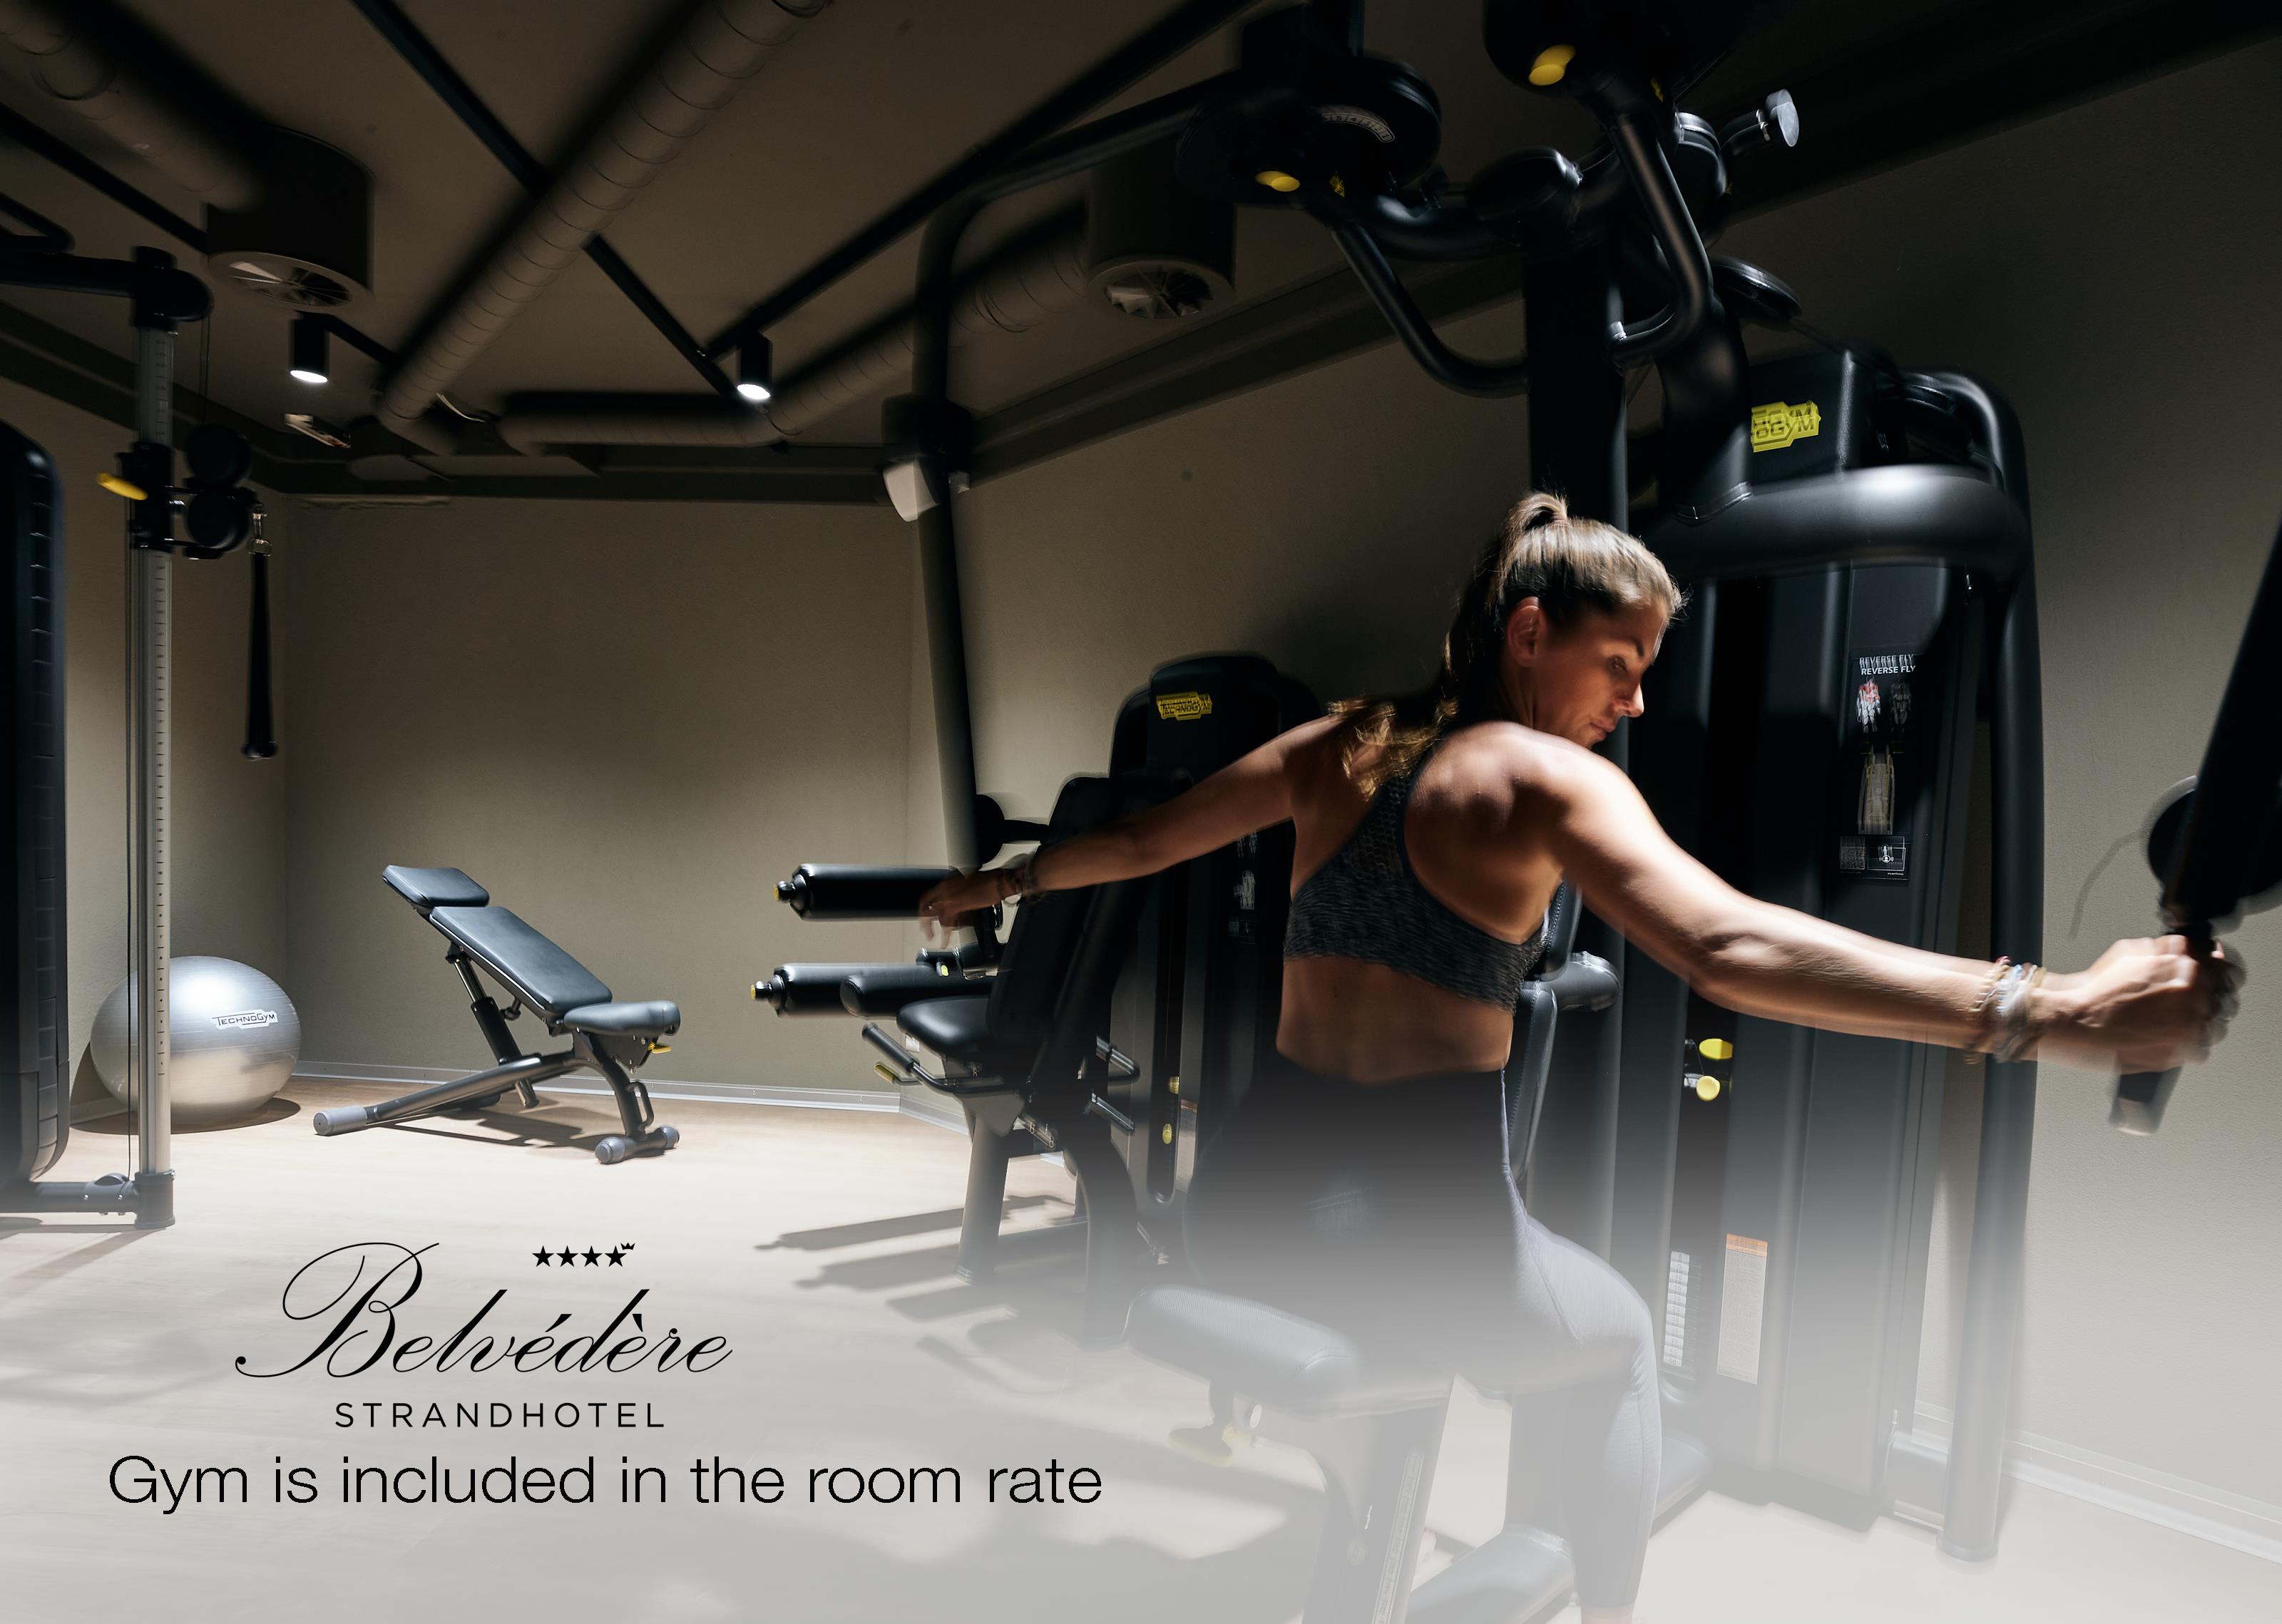 Gym is included in the room rate